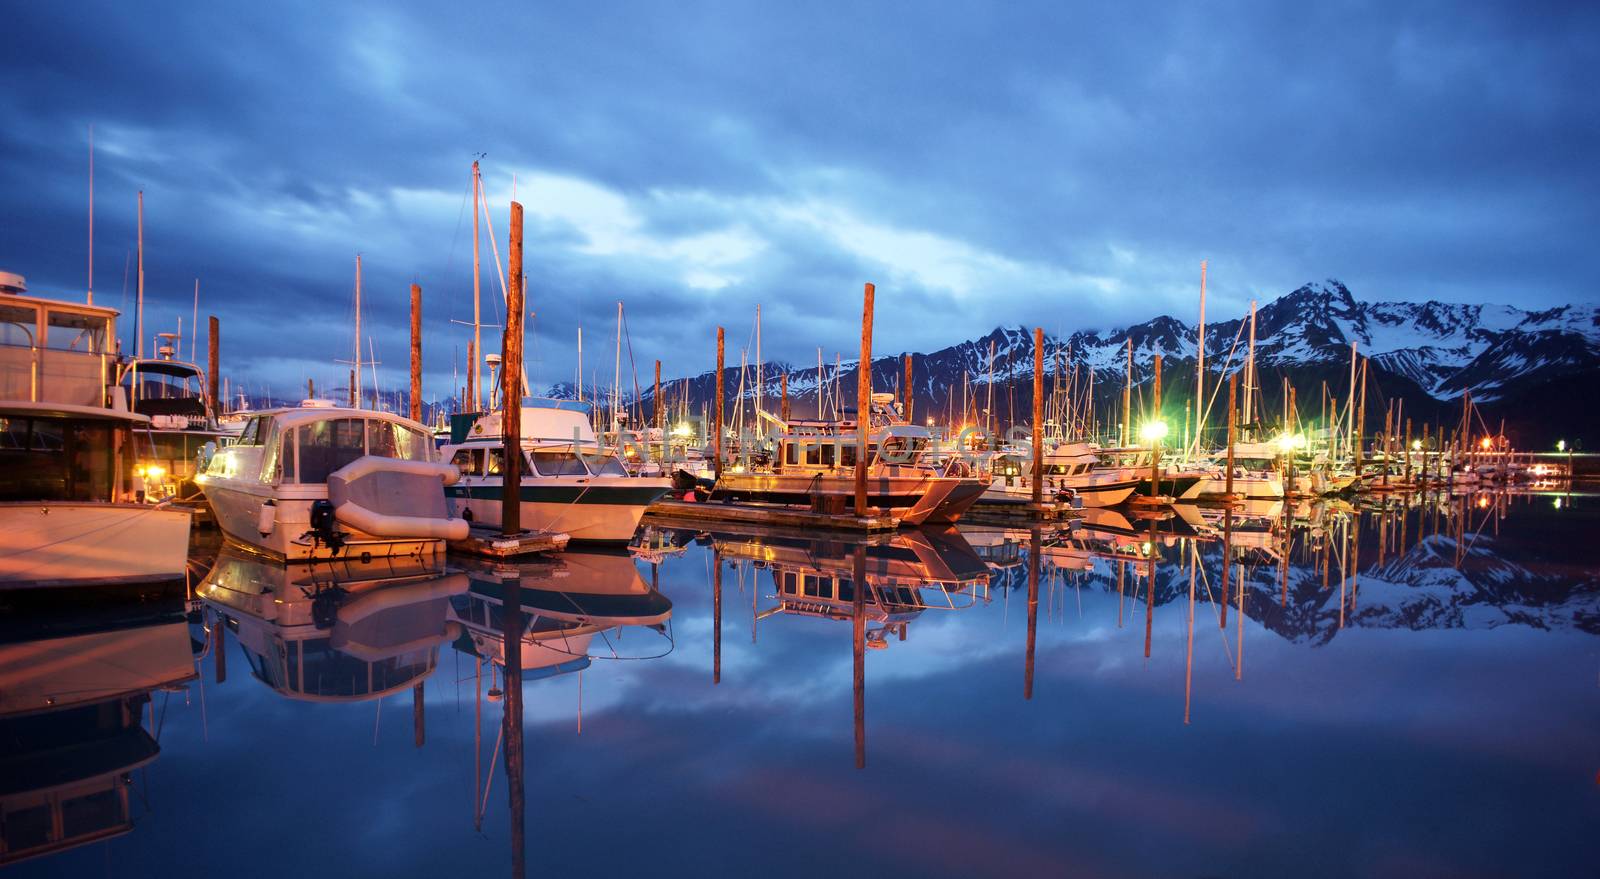 Seward Marina and Boats in the Middle of the Night Smooth Water by ChrisBoswell